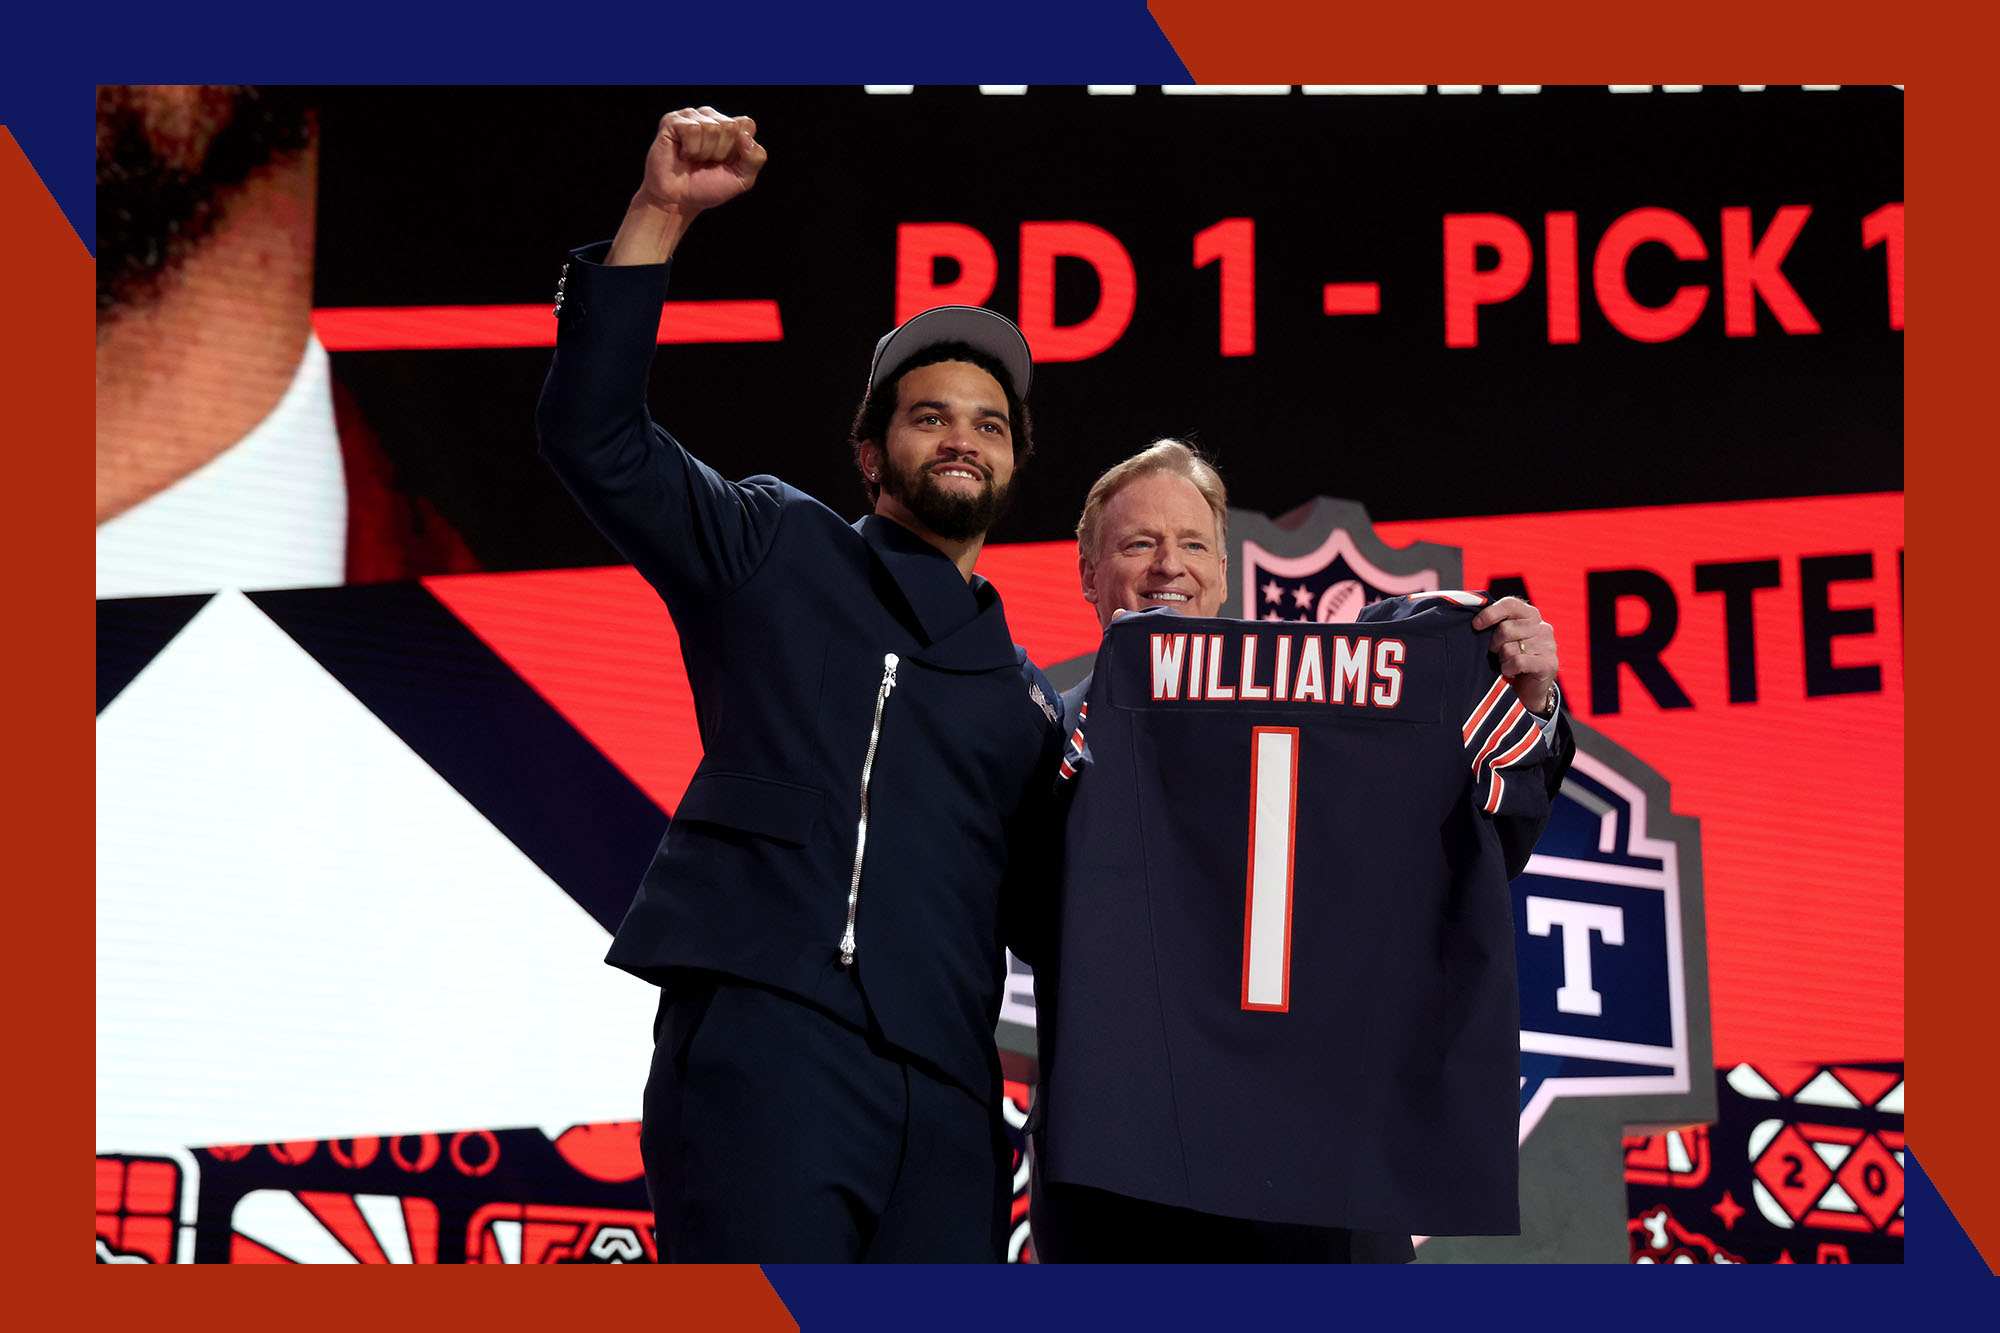 Chicago Bears quarterback Caleb Williams (L) raises his fist next to NFL Commissioner Roger Goodell after being selected with the number one pick at the 2024 NFL Draft.